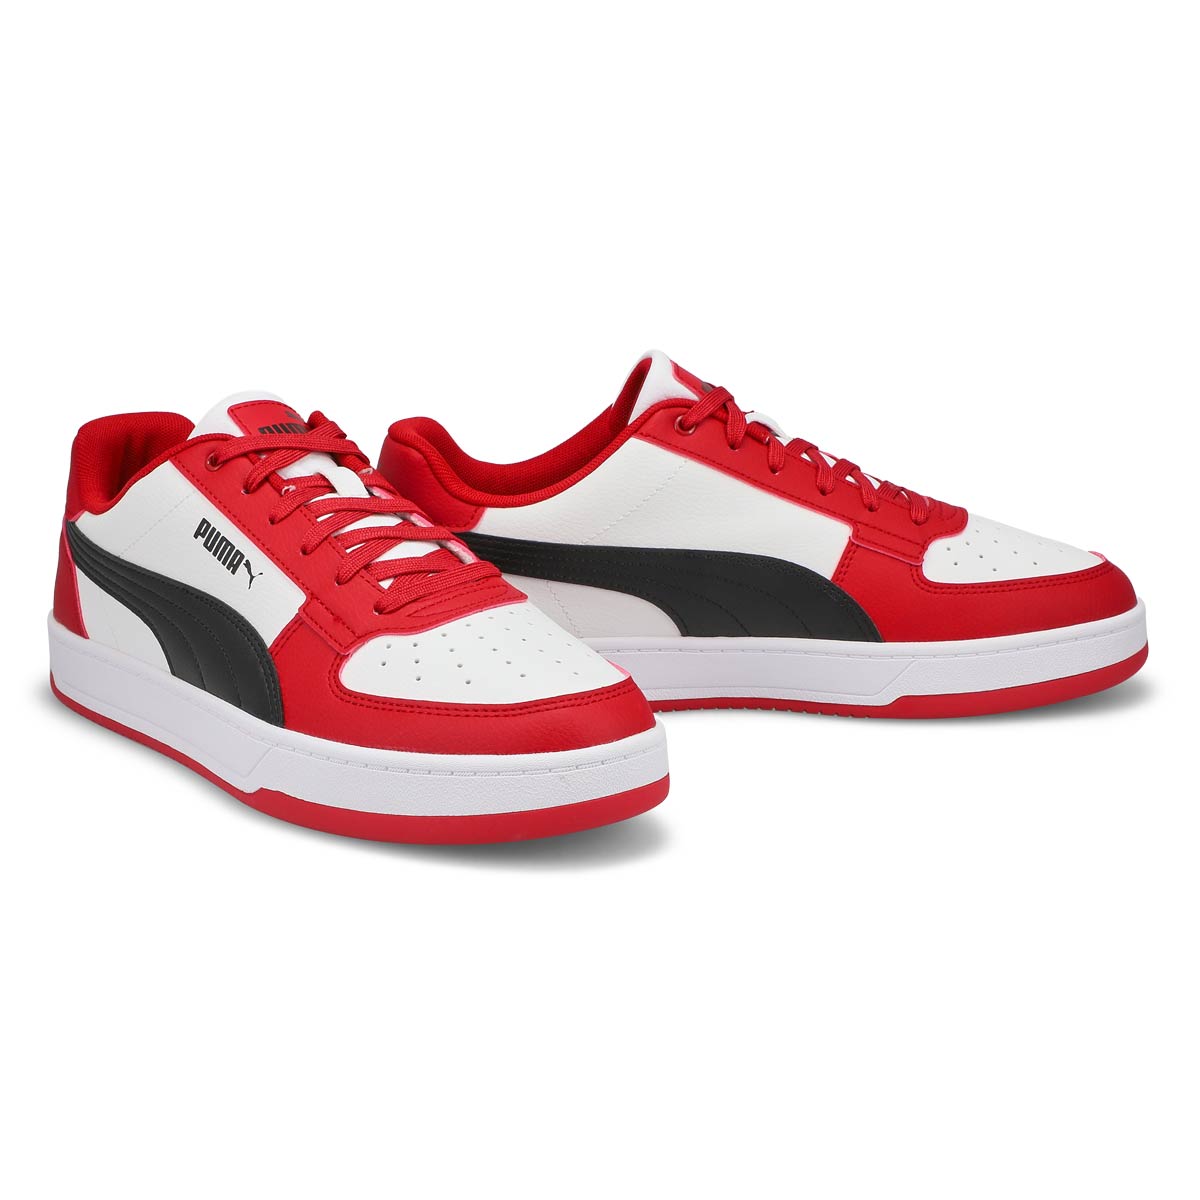 Men's Caven 2.0 Lace Up Sneaker - Red/White/Black